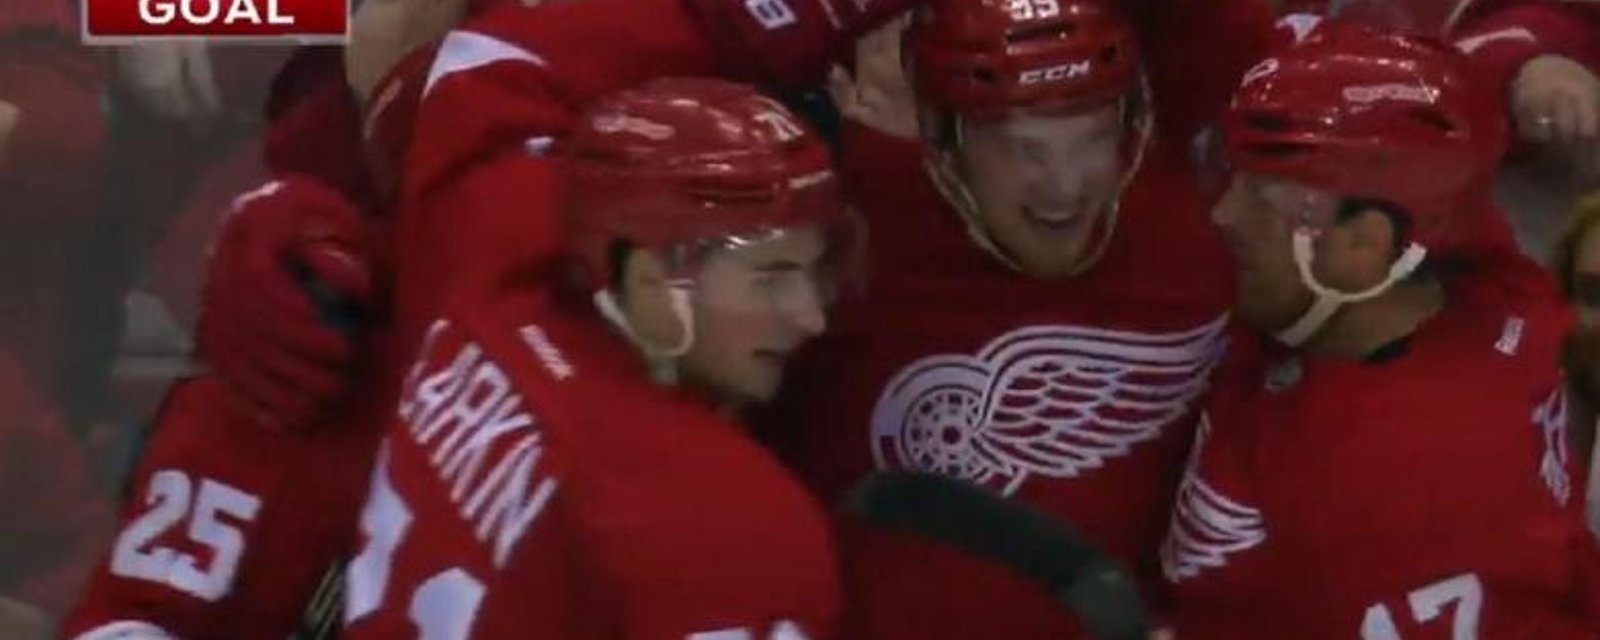 Red Wing forward scores his first career goal!